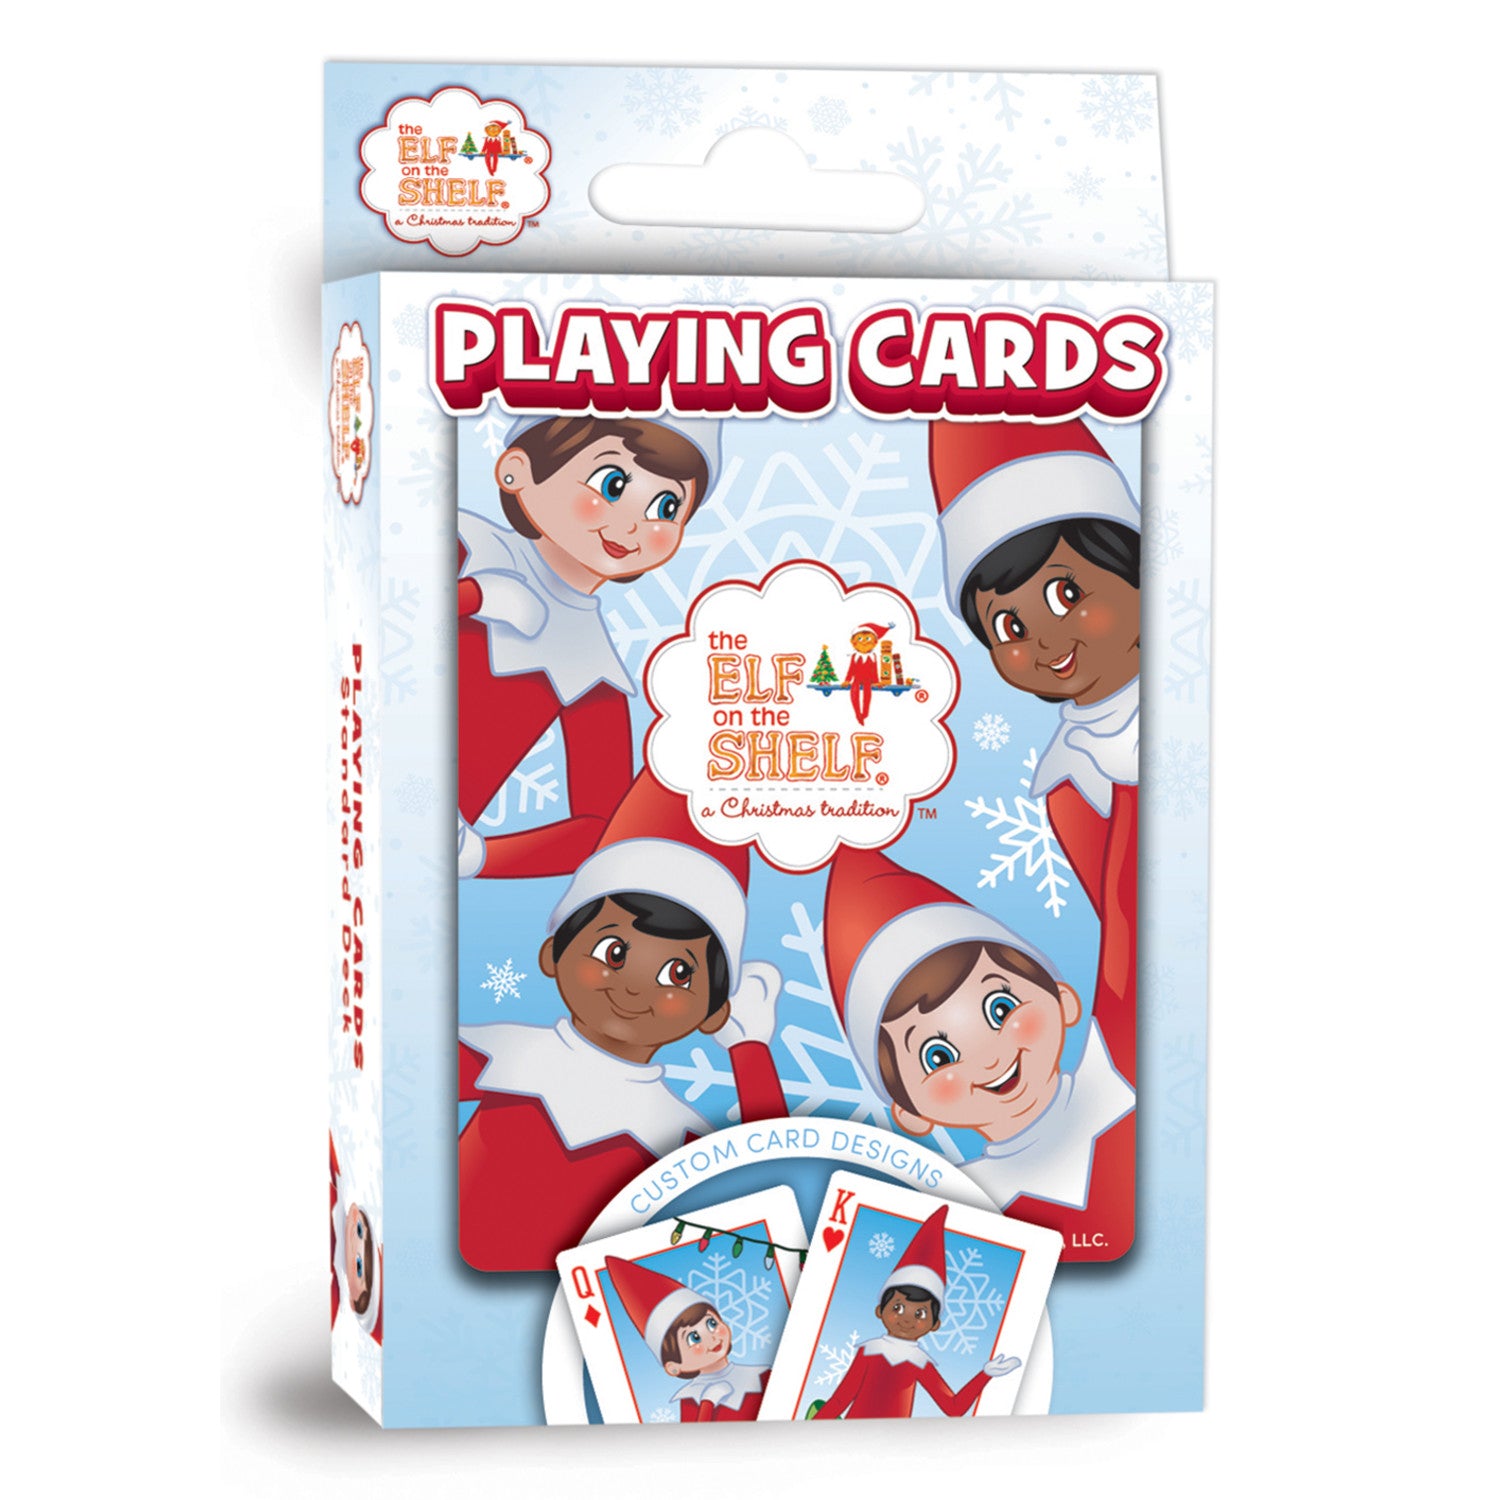 Elf on the Shelf Playing Cards - 54 Card Deck